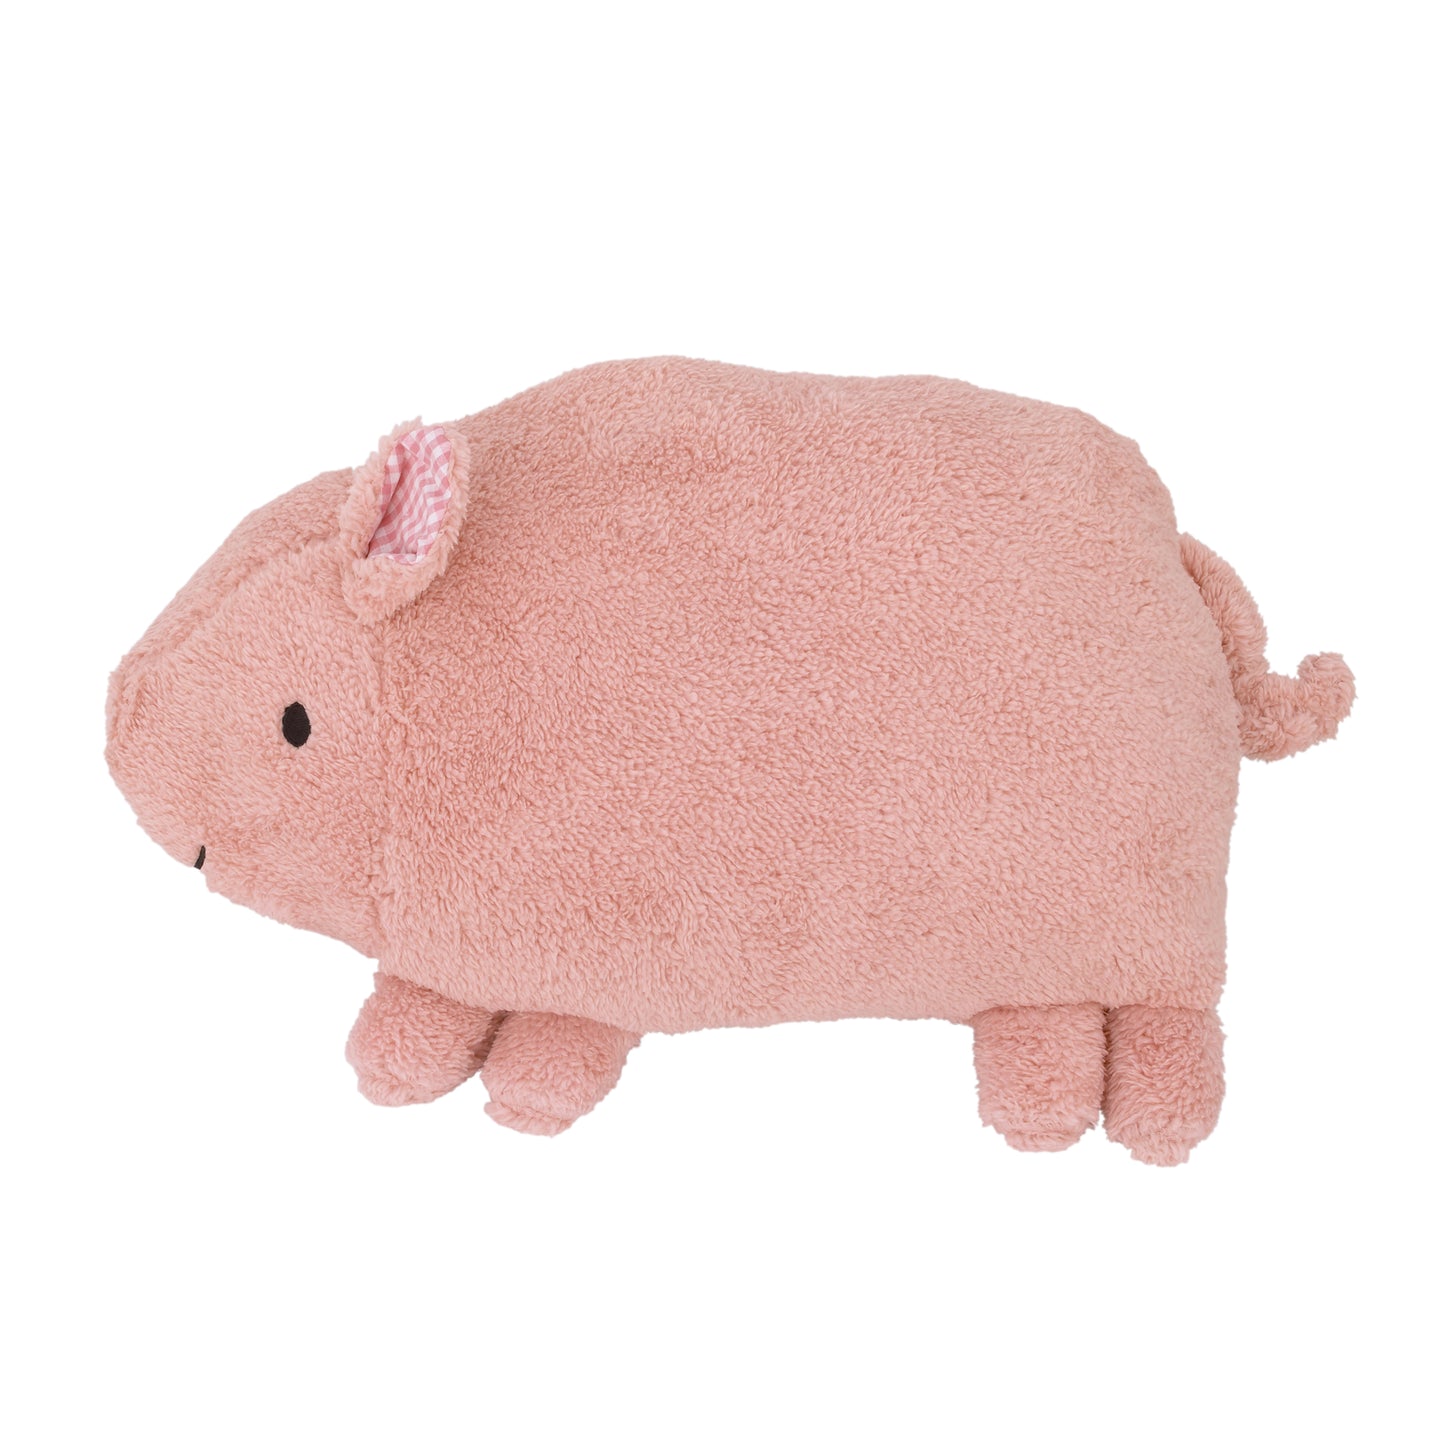 Little Love by NoJo Plush Sherpa Pink Pig Decorative Throw Pillow with 3D Ears and Dimensional Tail